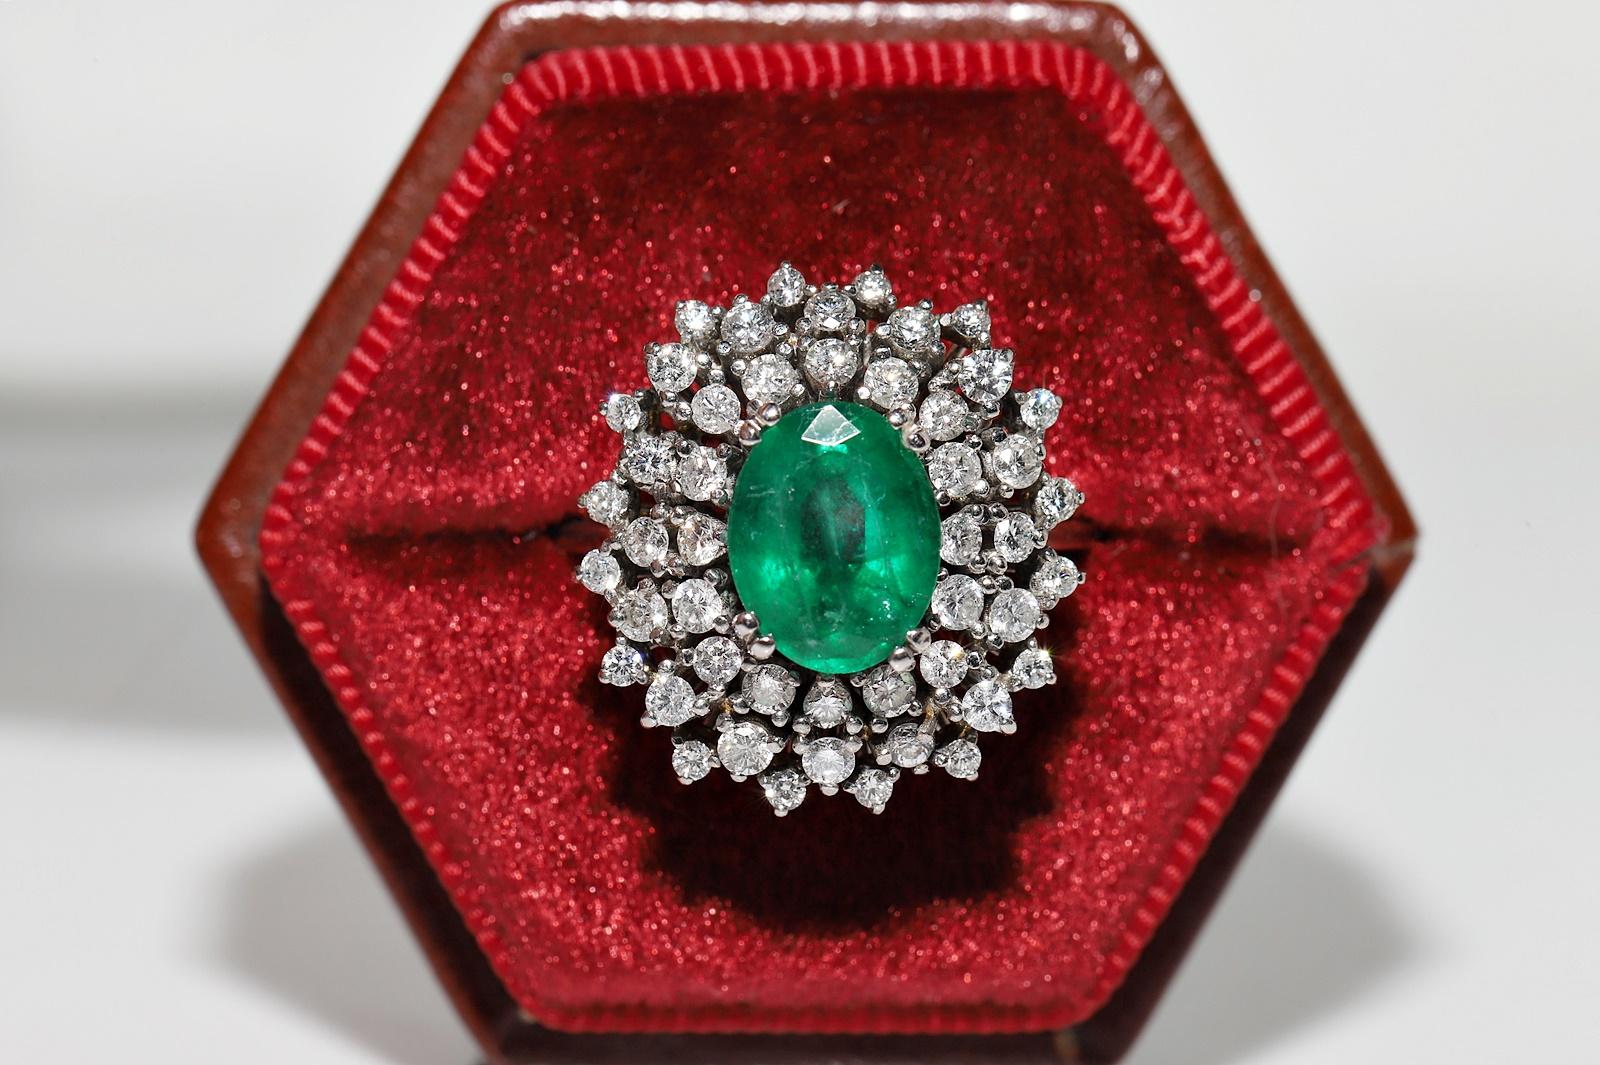 In very good condition.
Total weight is 8.3 grams.
Totally is diamond 1.60 ct.
The diamond is has G-H color and vs-s1 clarity.
Totally is emerald 2 ct.
Ring size is US 9.5 
We can make any size.
Box is not included.
Please contact for any questions.